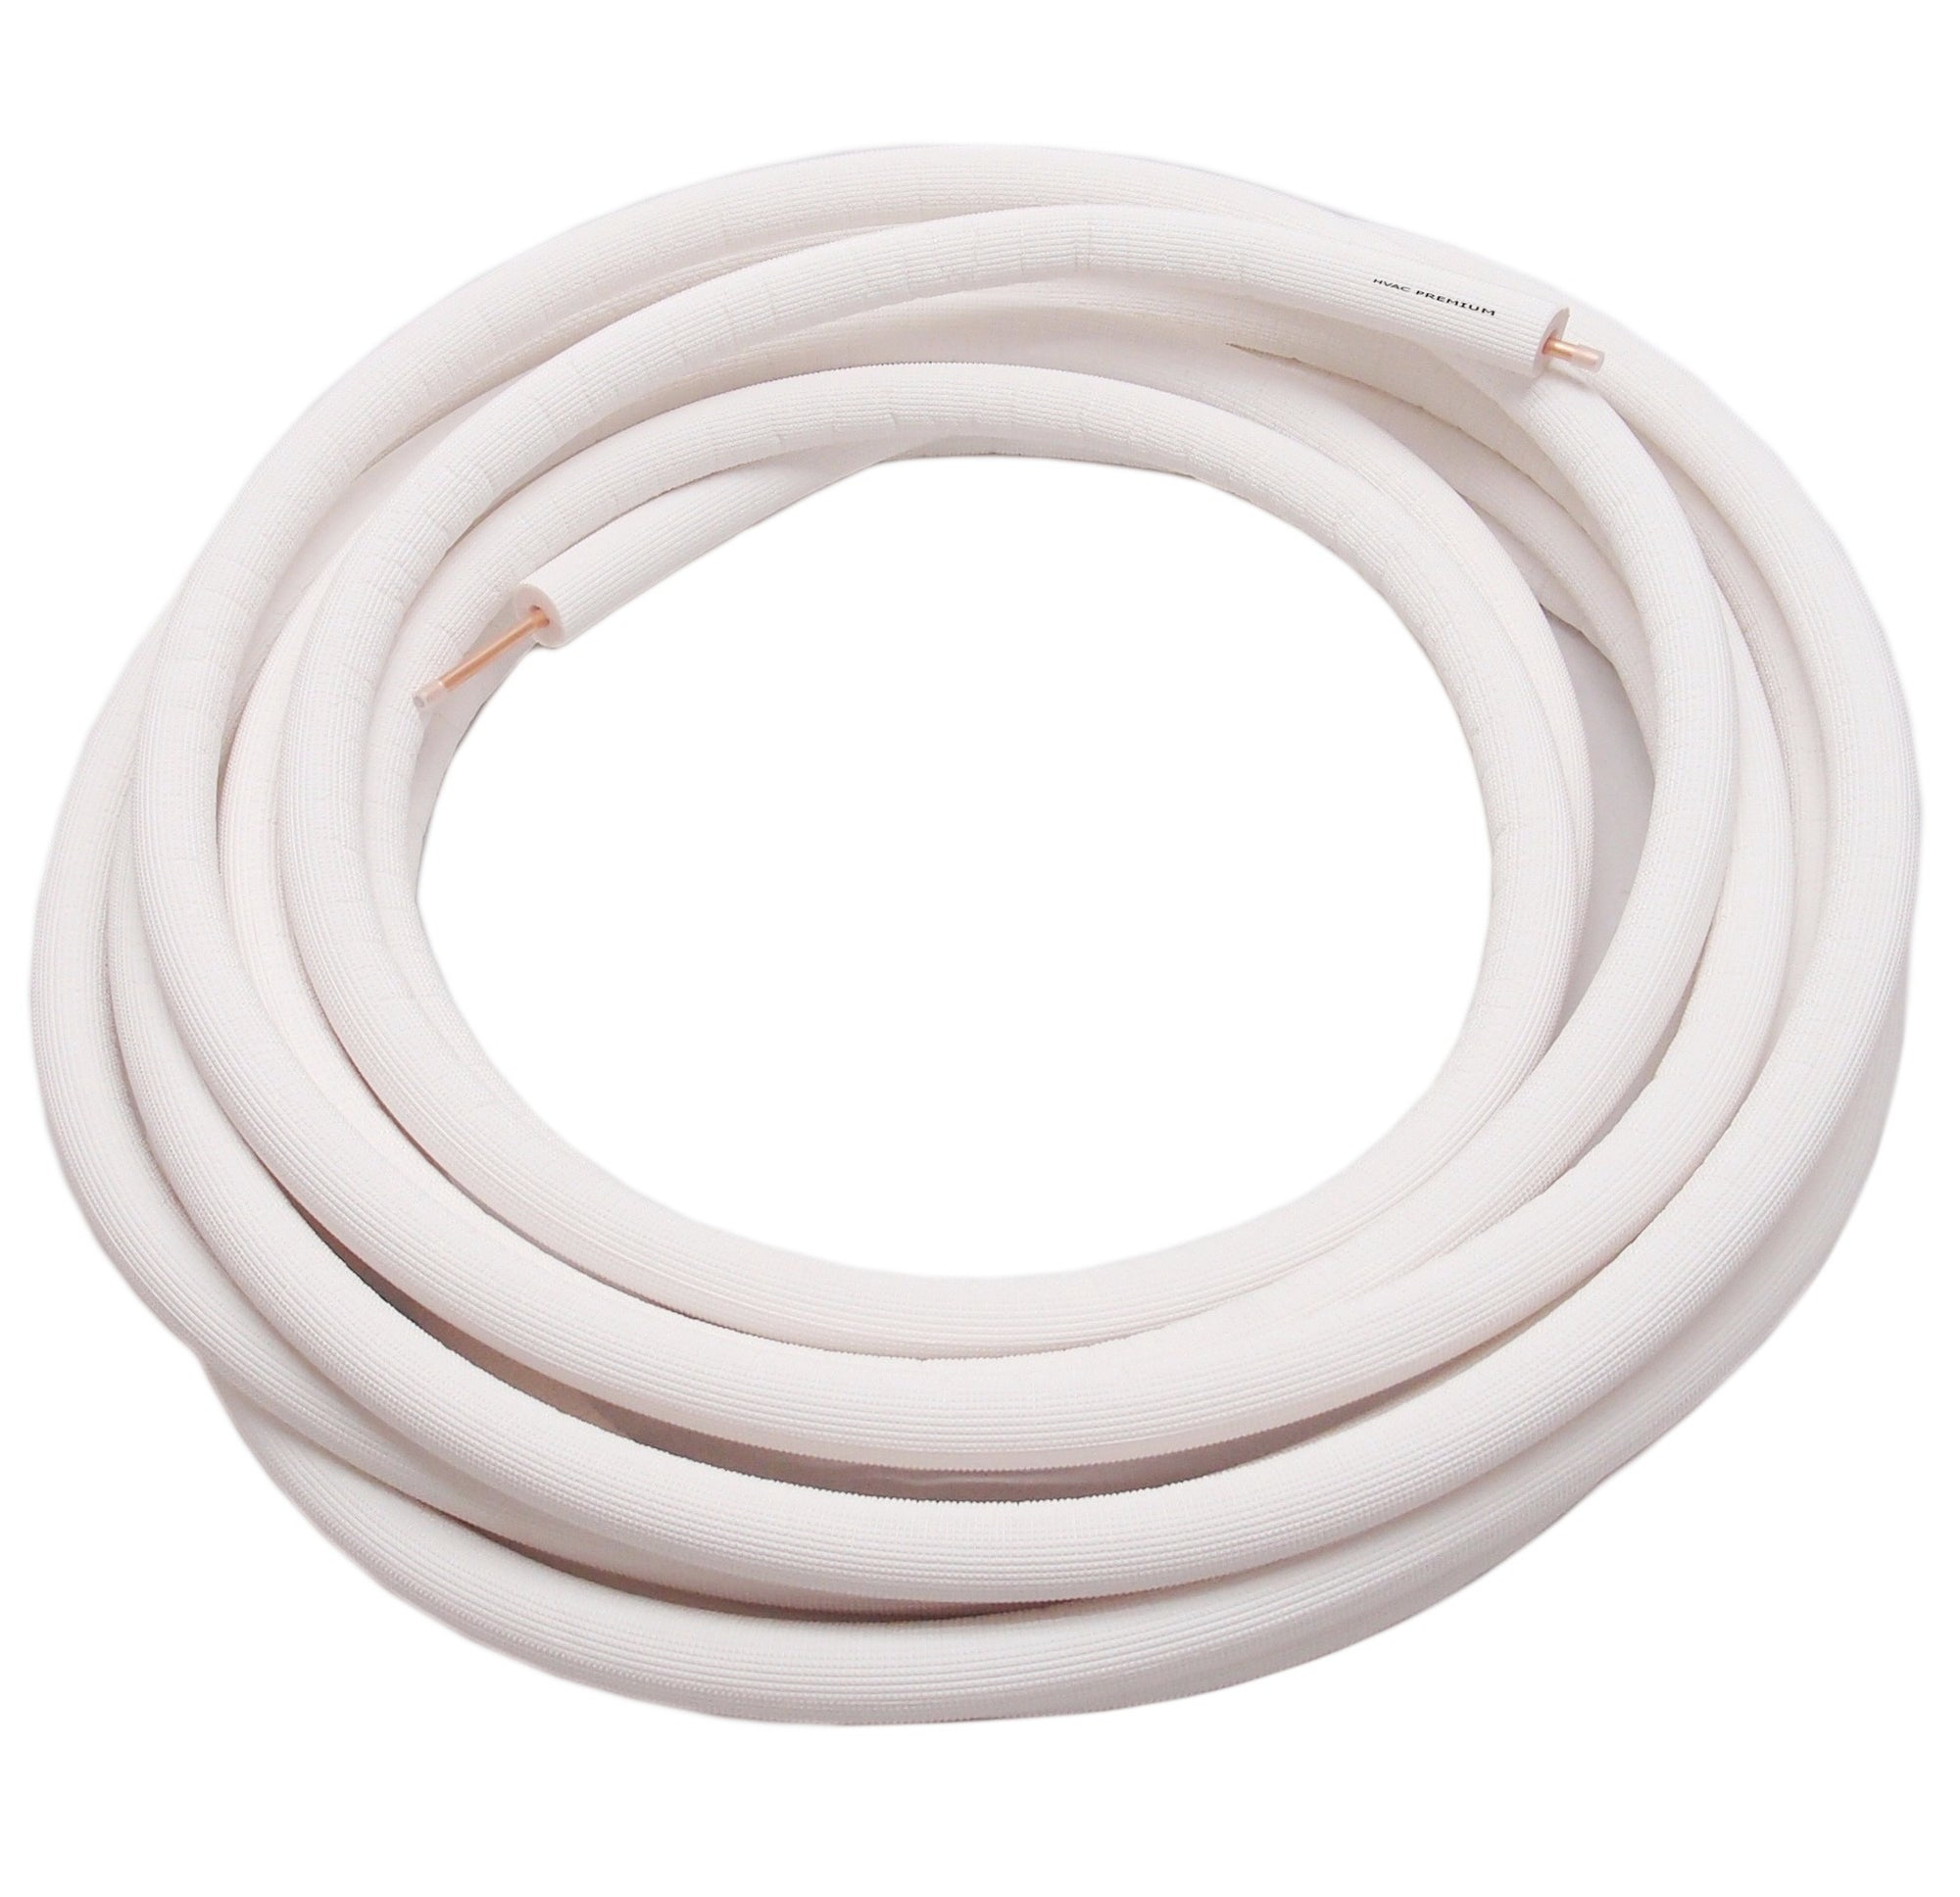 1-1/8" Insulated Copper Coil Line - Seamless Pipe Tube for HVAC, Refrigerant - 1/2" White Insulation - 15' Long